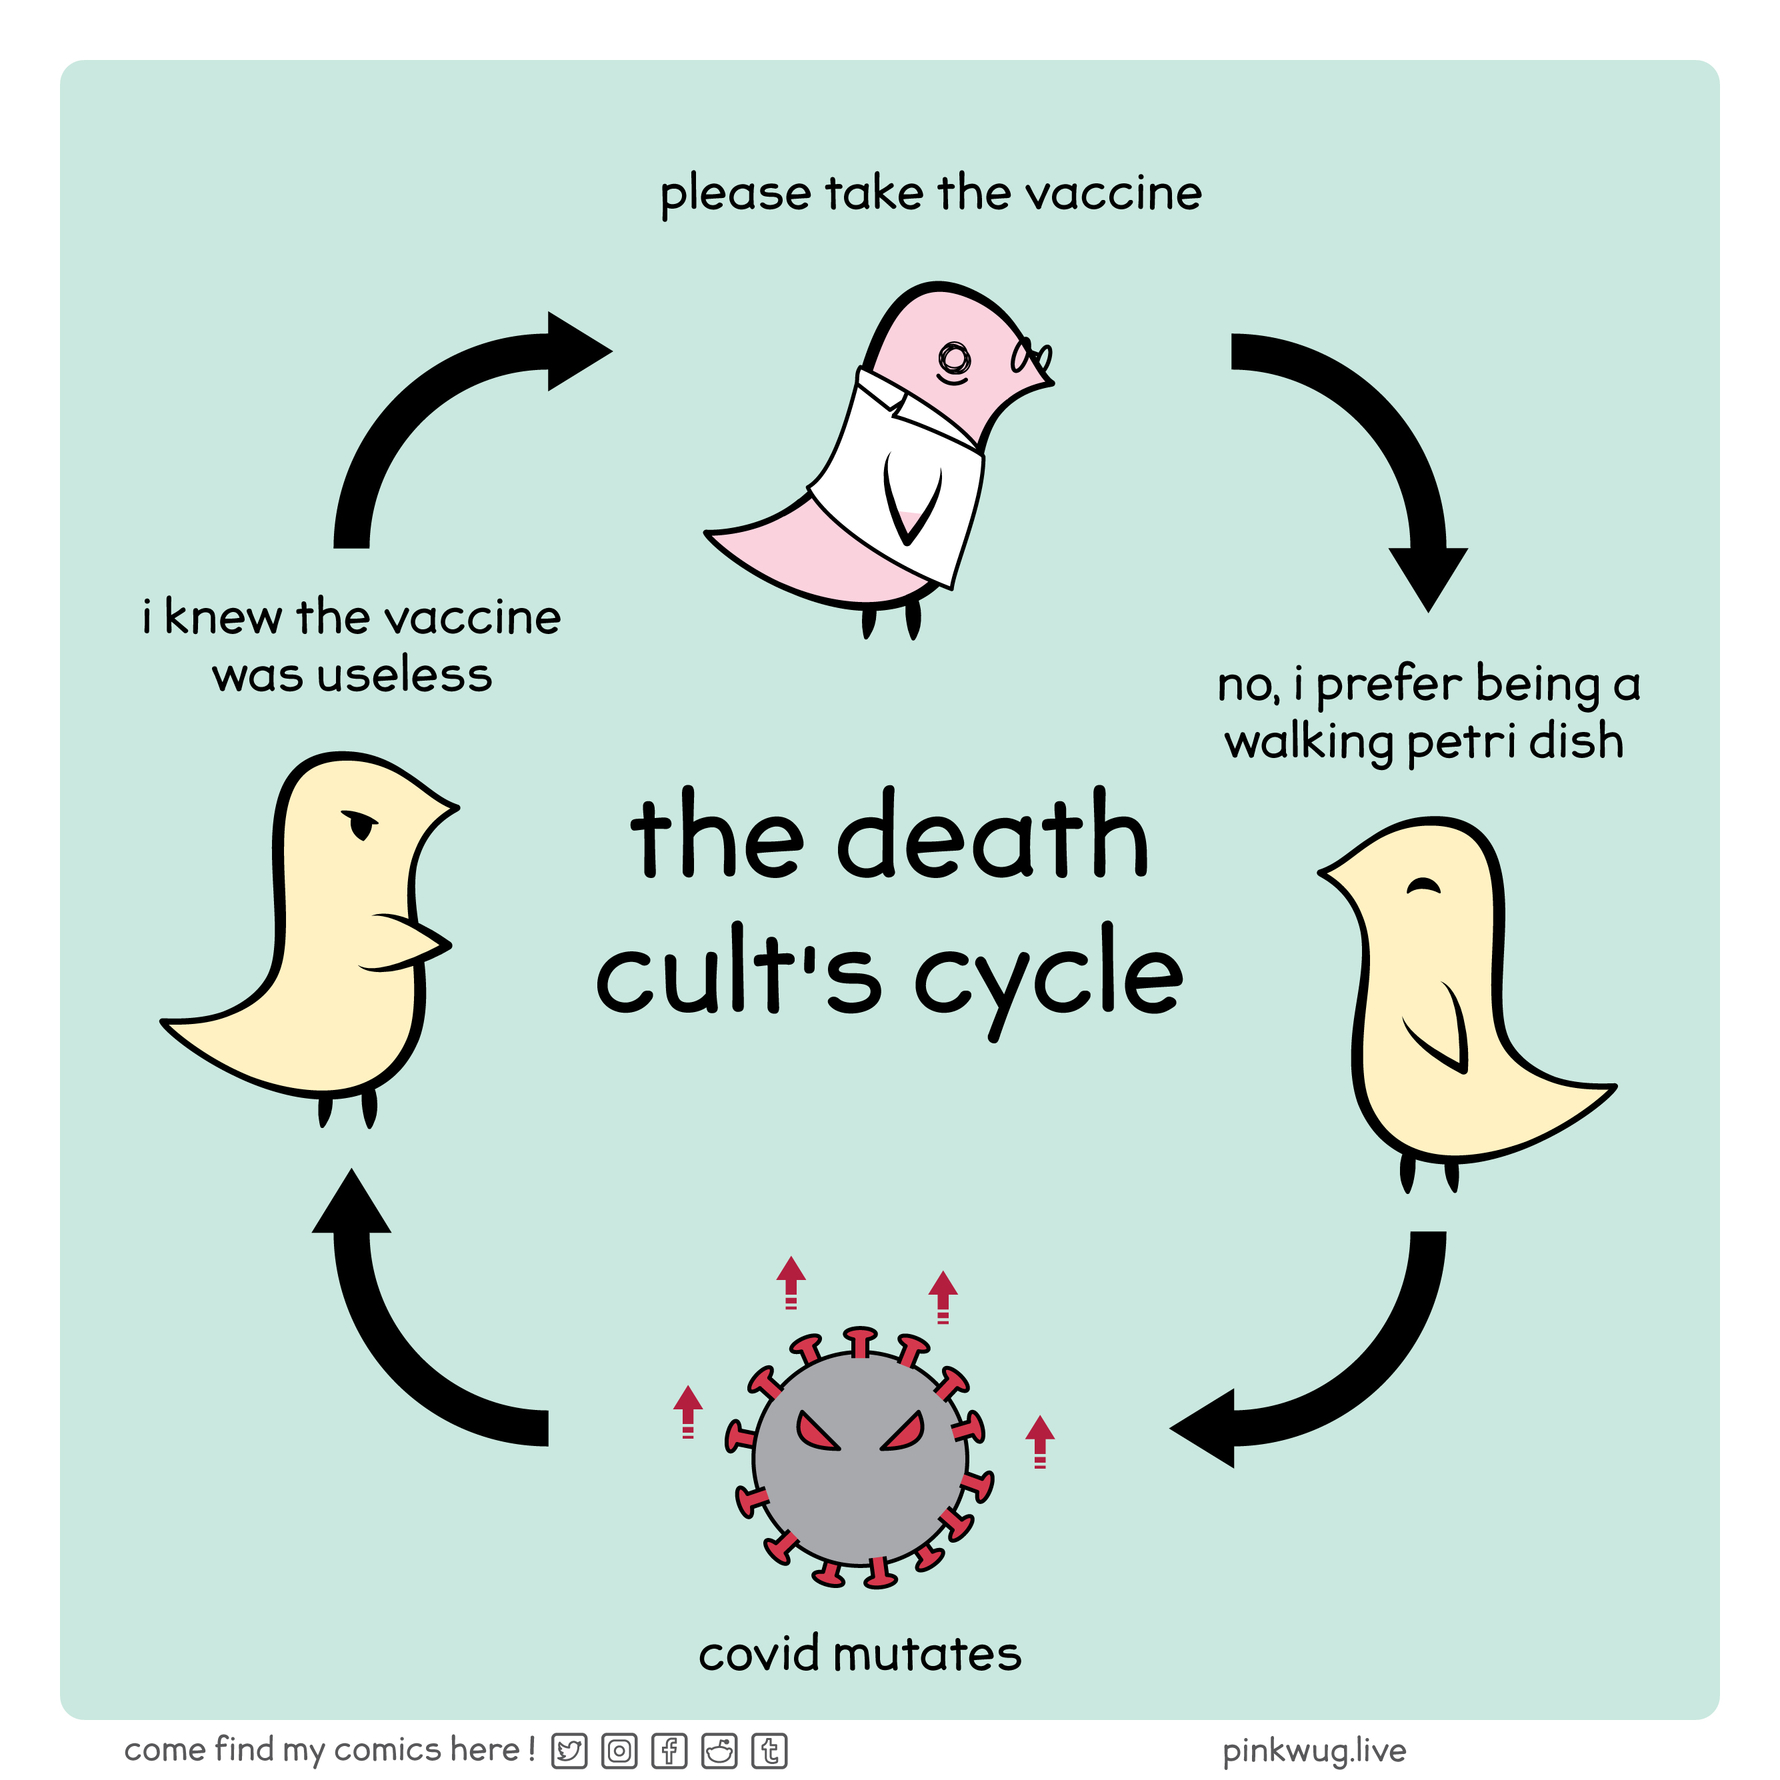 pinkwug comic: There are 4 sections being depicted in a cycle named "the death cult's cycle"

Top center: an exhausted doctor saying "Please take the vaccine"

Center right: a smiling wug sauing "no, I prefer being a walking petri dish"

Bottom center: a covid virus with evil eyes leveling up with the caption "Covid mutates"

Center left: an angry wug saying: "I knew the vaccine was useless"